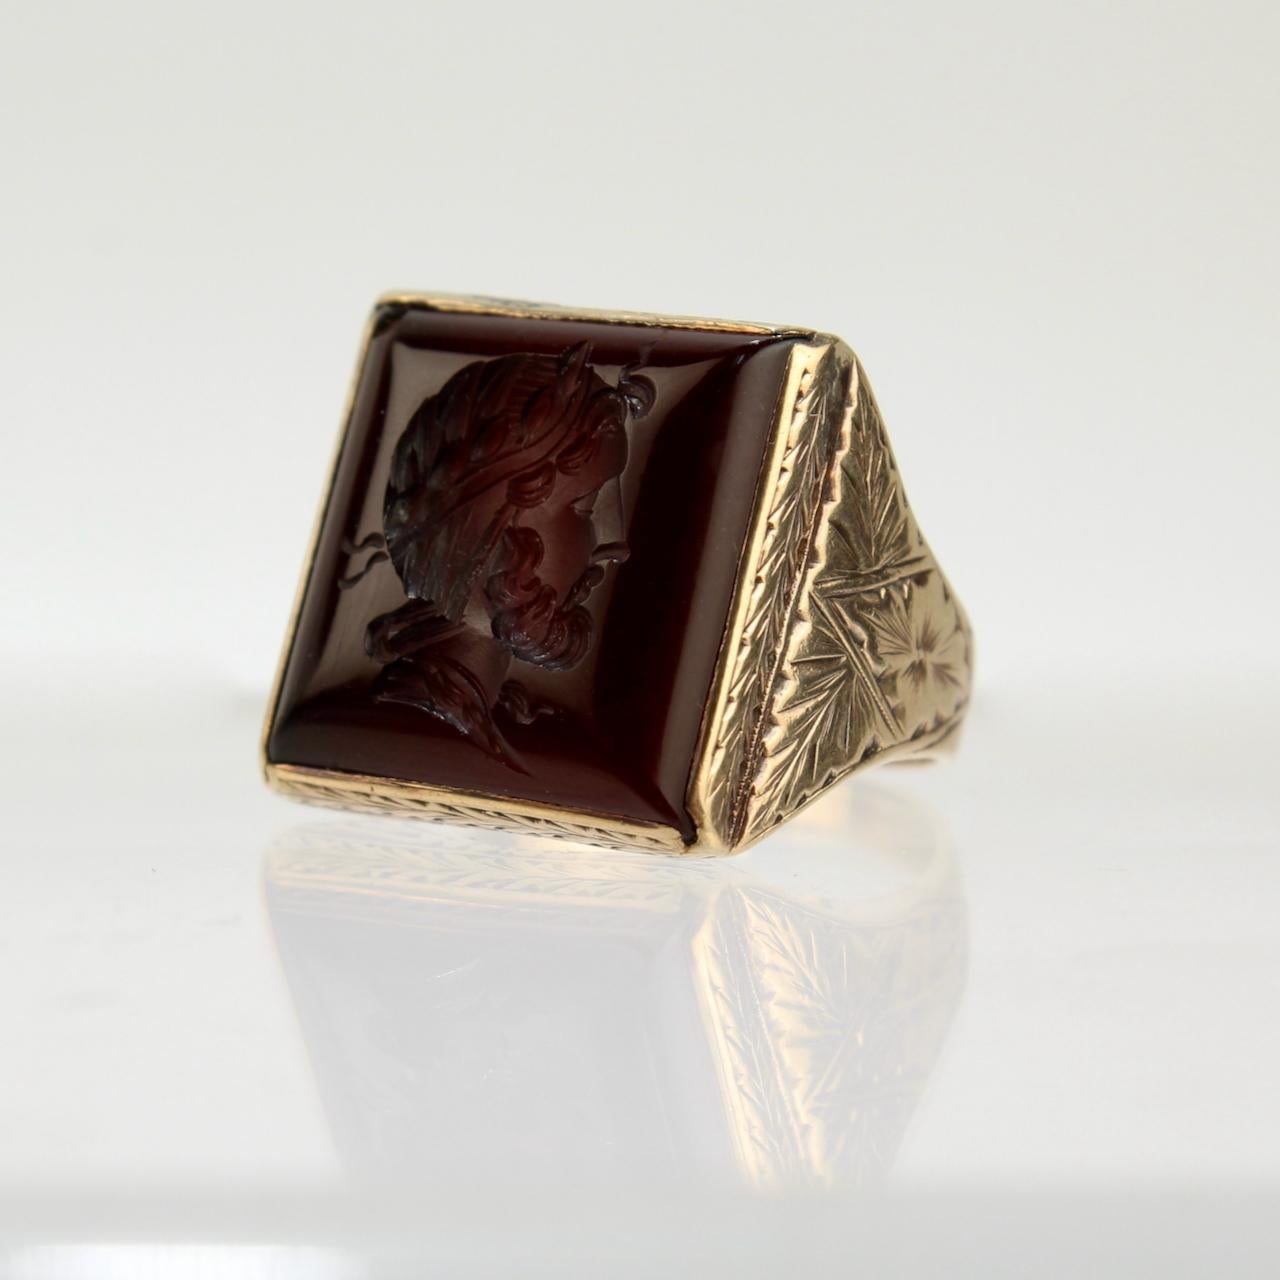 Offered here for your consideration is a 14K gold signet ring.

With a carved cameo in the center of a square carnelian cabochon that is bezel set in 14 karat gold. 

The setting has a floral engraved bridge and shank.

Date:
Late 19th or Early 20th